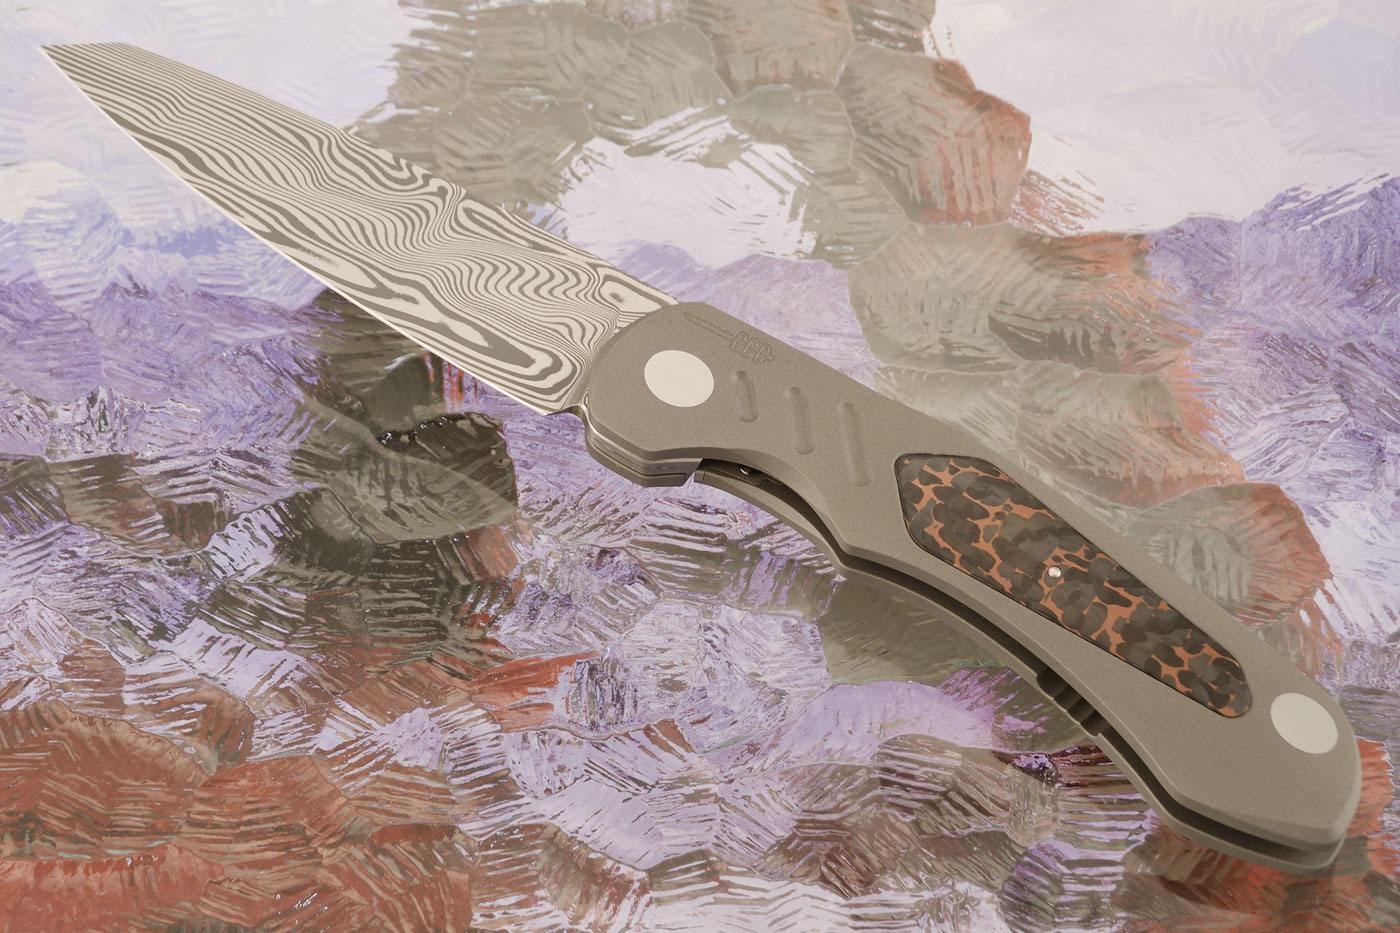 Viper RT Front Flipper with Damasteel and Copper Snakeskin FatCarbon